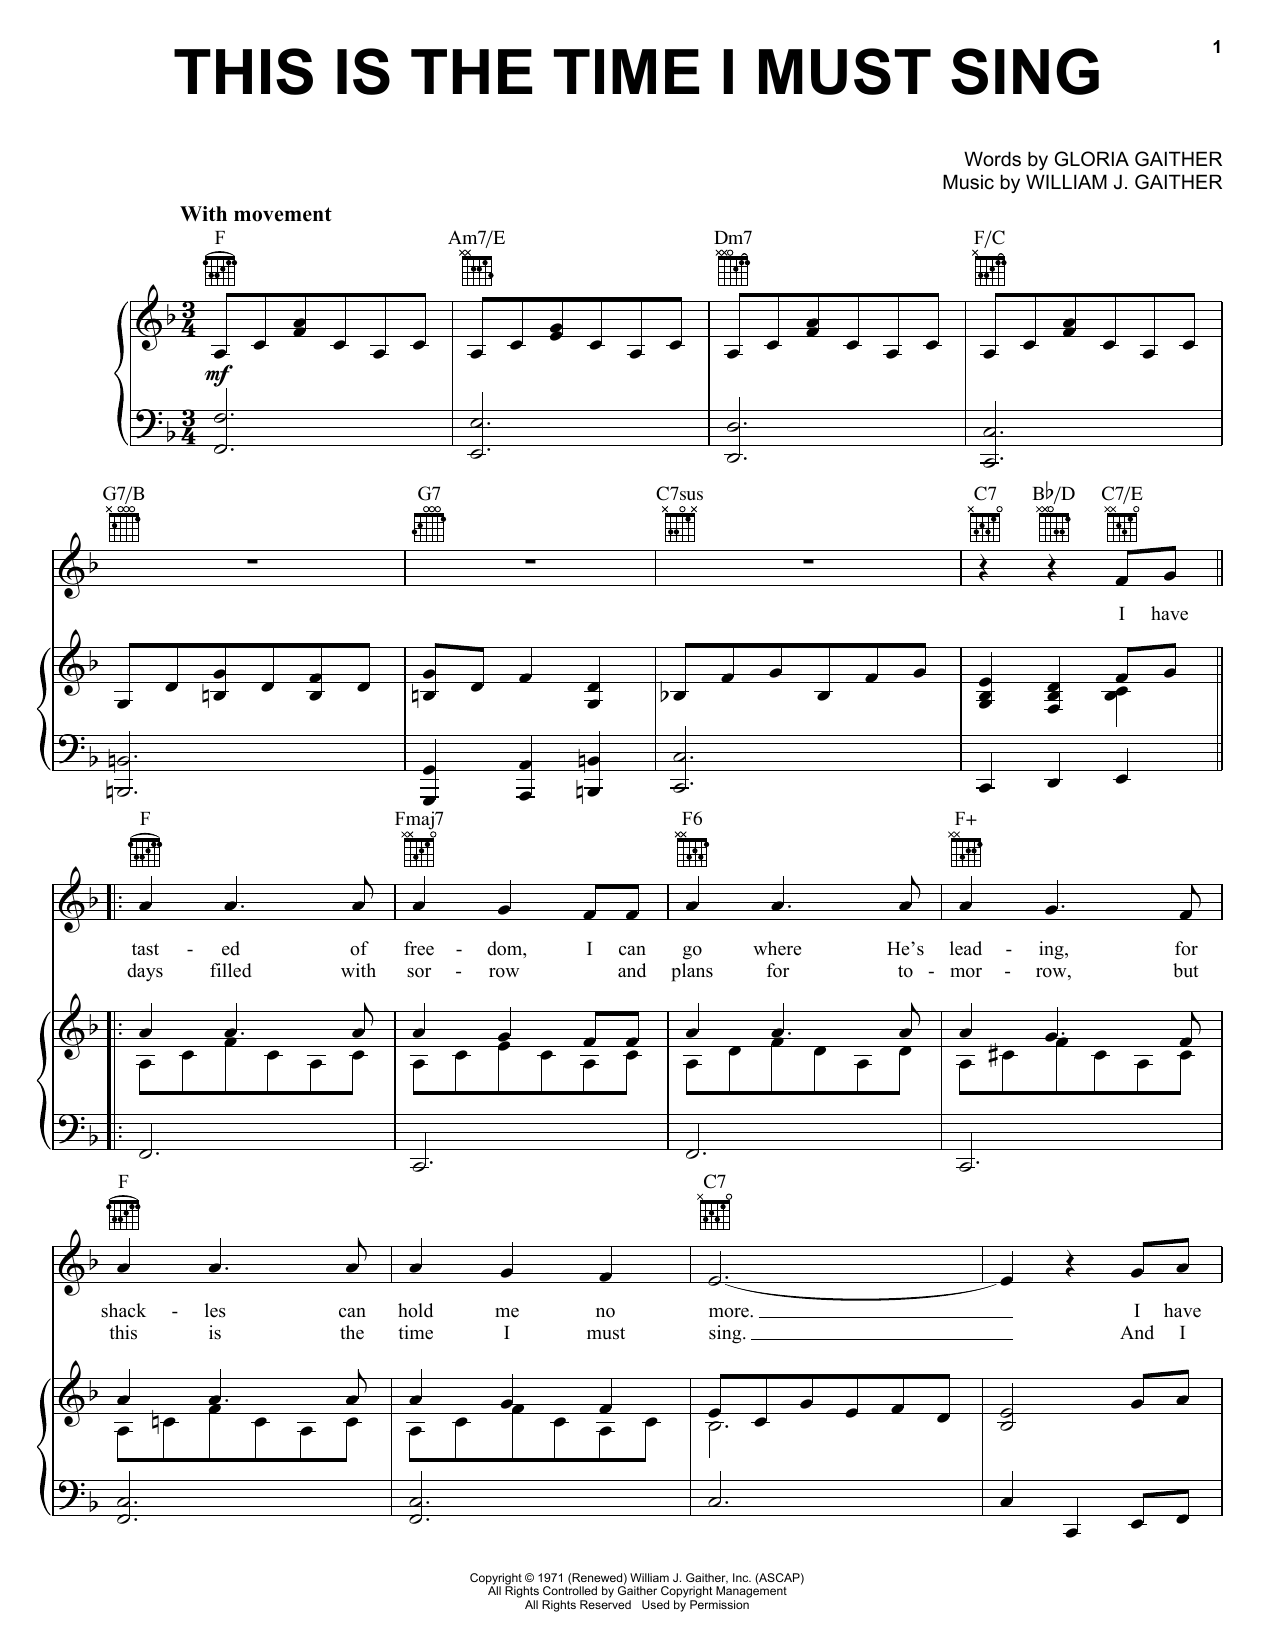 Download Bill & Gloria Gaither This Is The Time I Must Sing Sheet Music